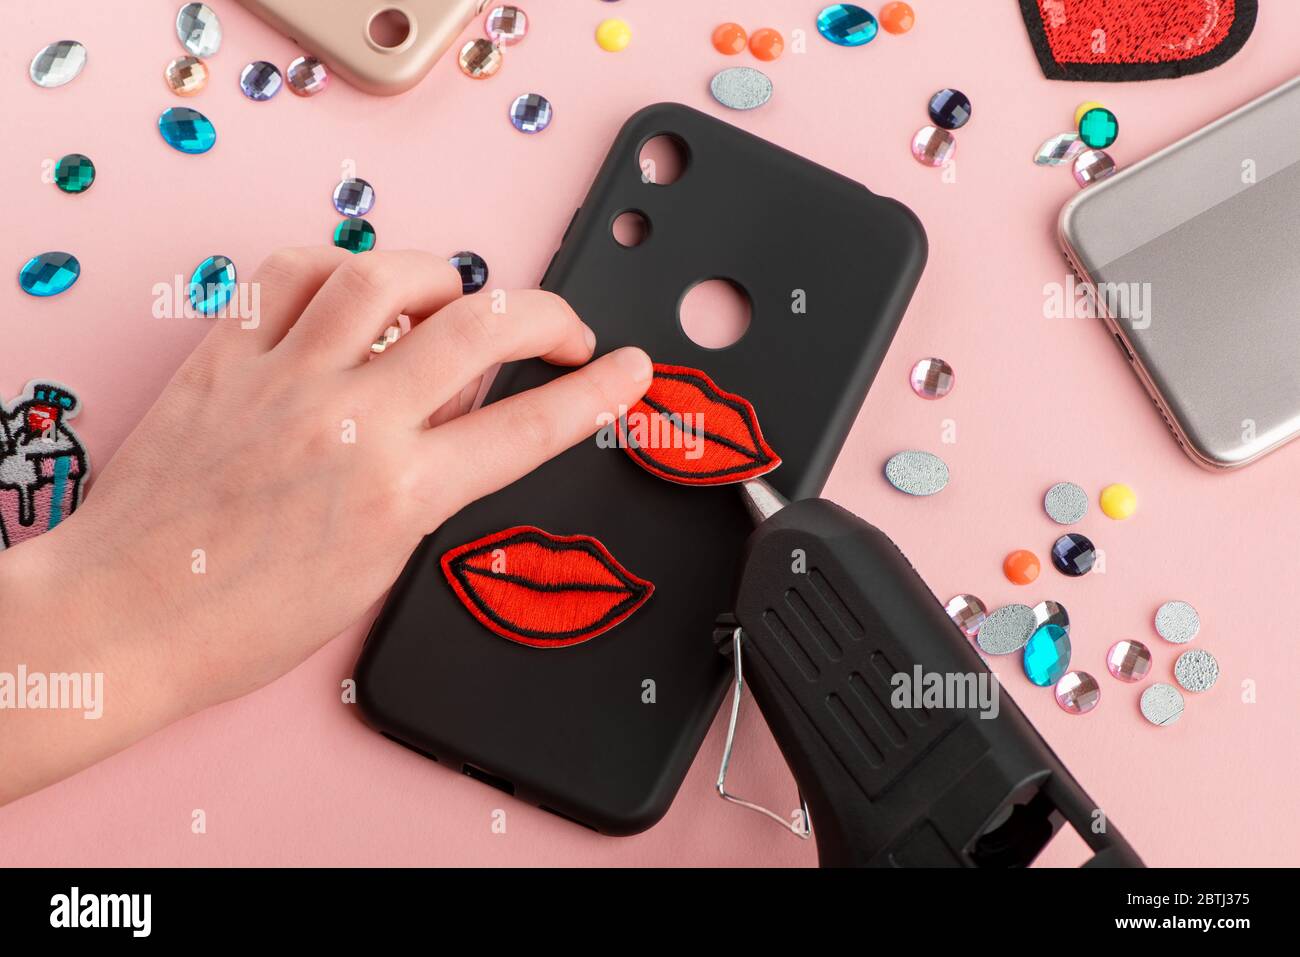 Girl attaching red lips patches onto black phone case Stock Photo